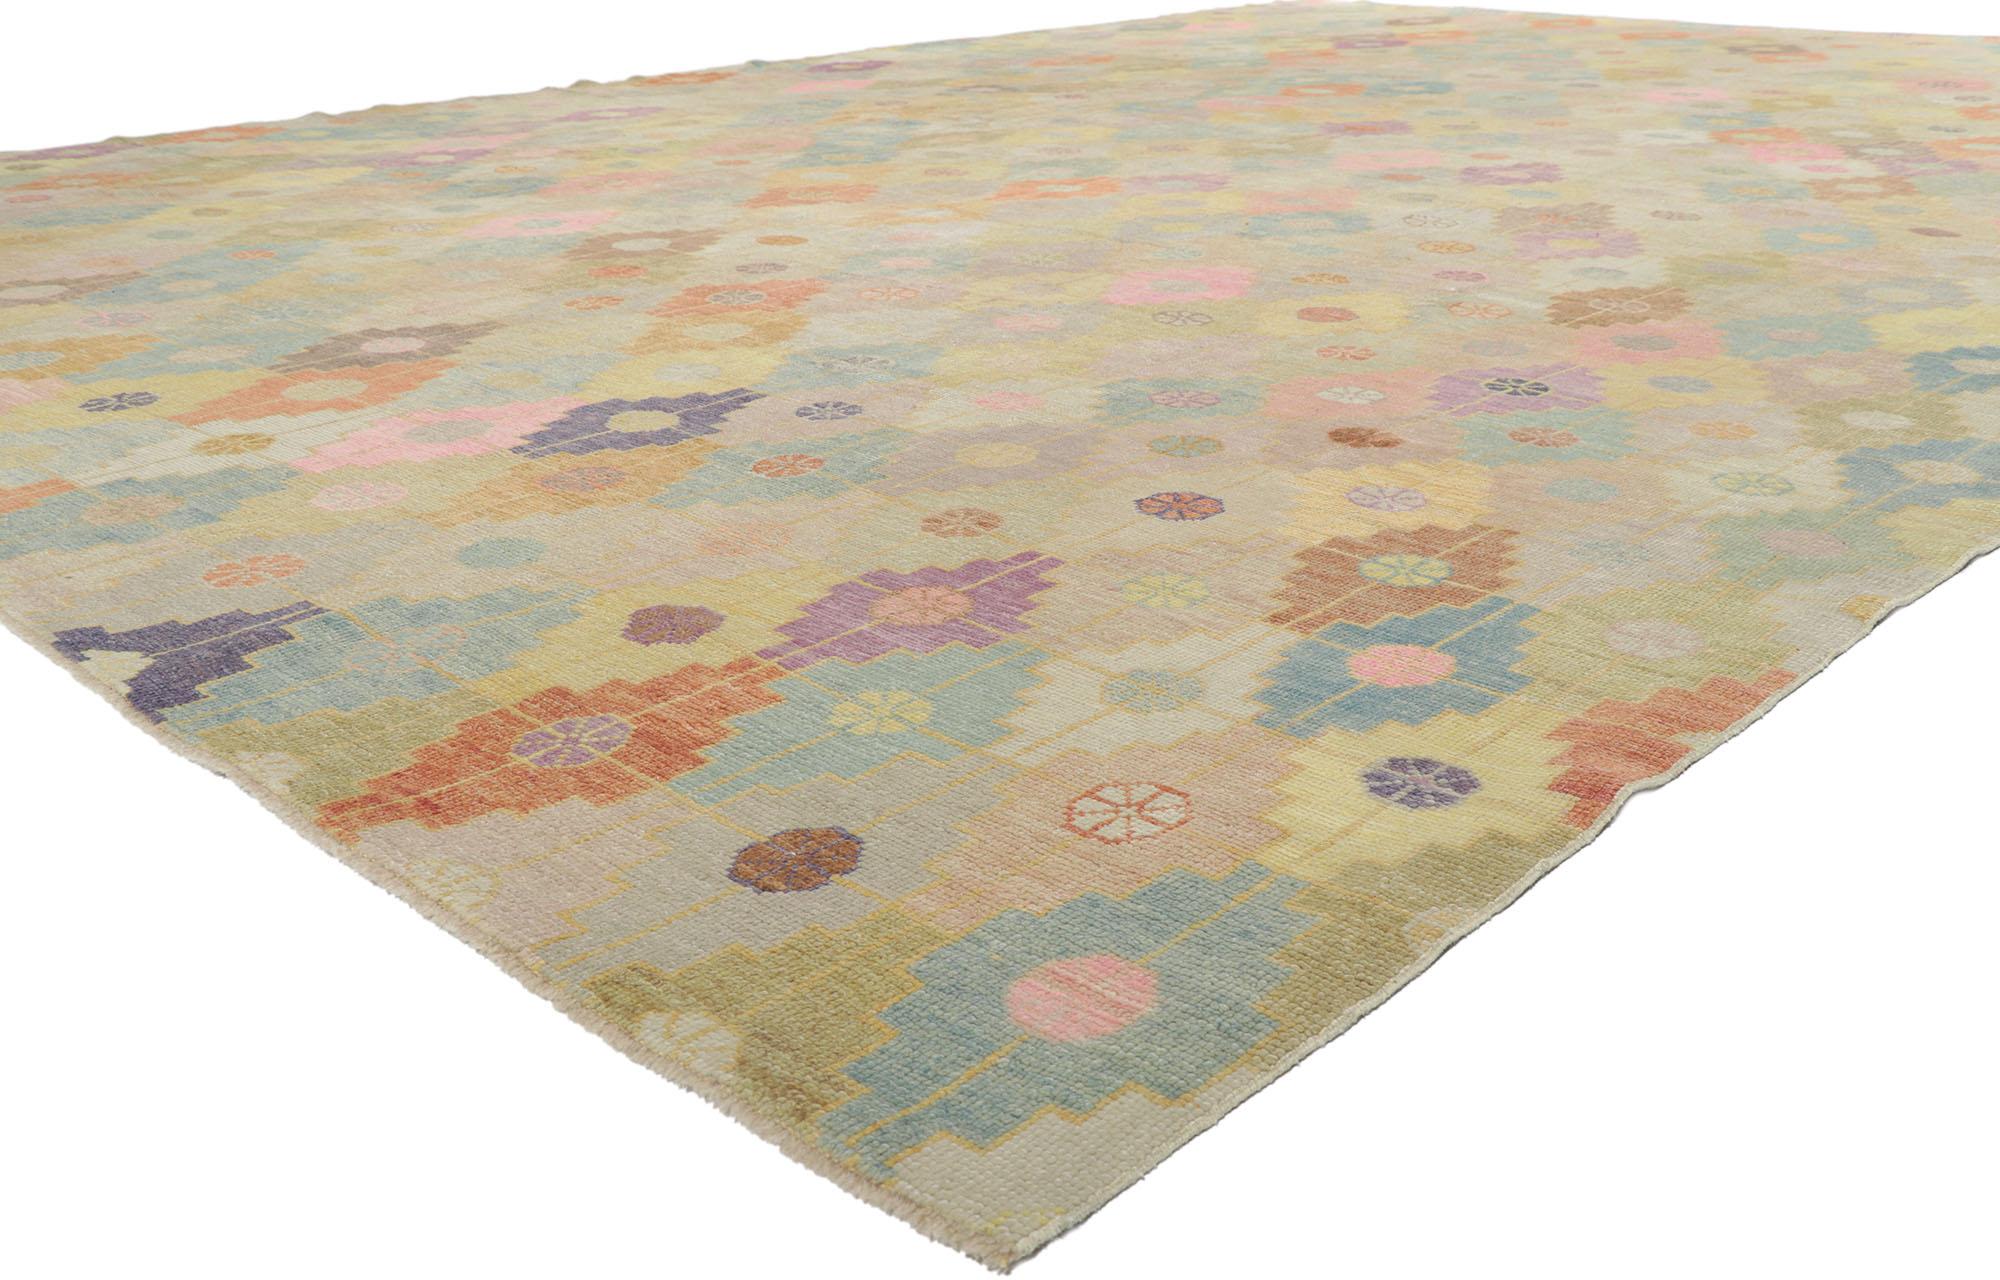 53779 new contemporary Turkish Oushak rug with pastel colors 12'00 x 17'09. With its simplicity, geometric design and pastel colors, this hand-knotted wool contemporary Turkish Oushak rug is a vision of woven beauty. The abrashed field features an